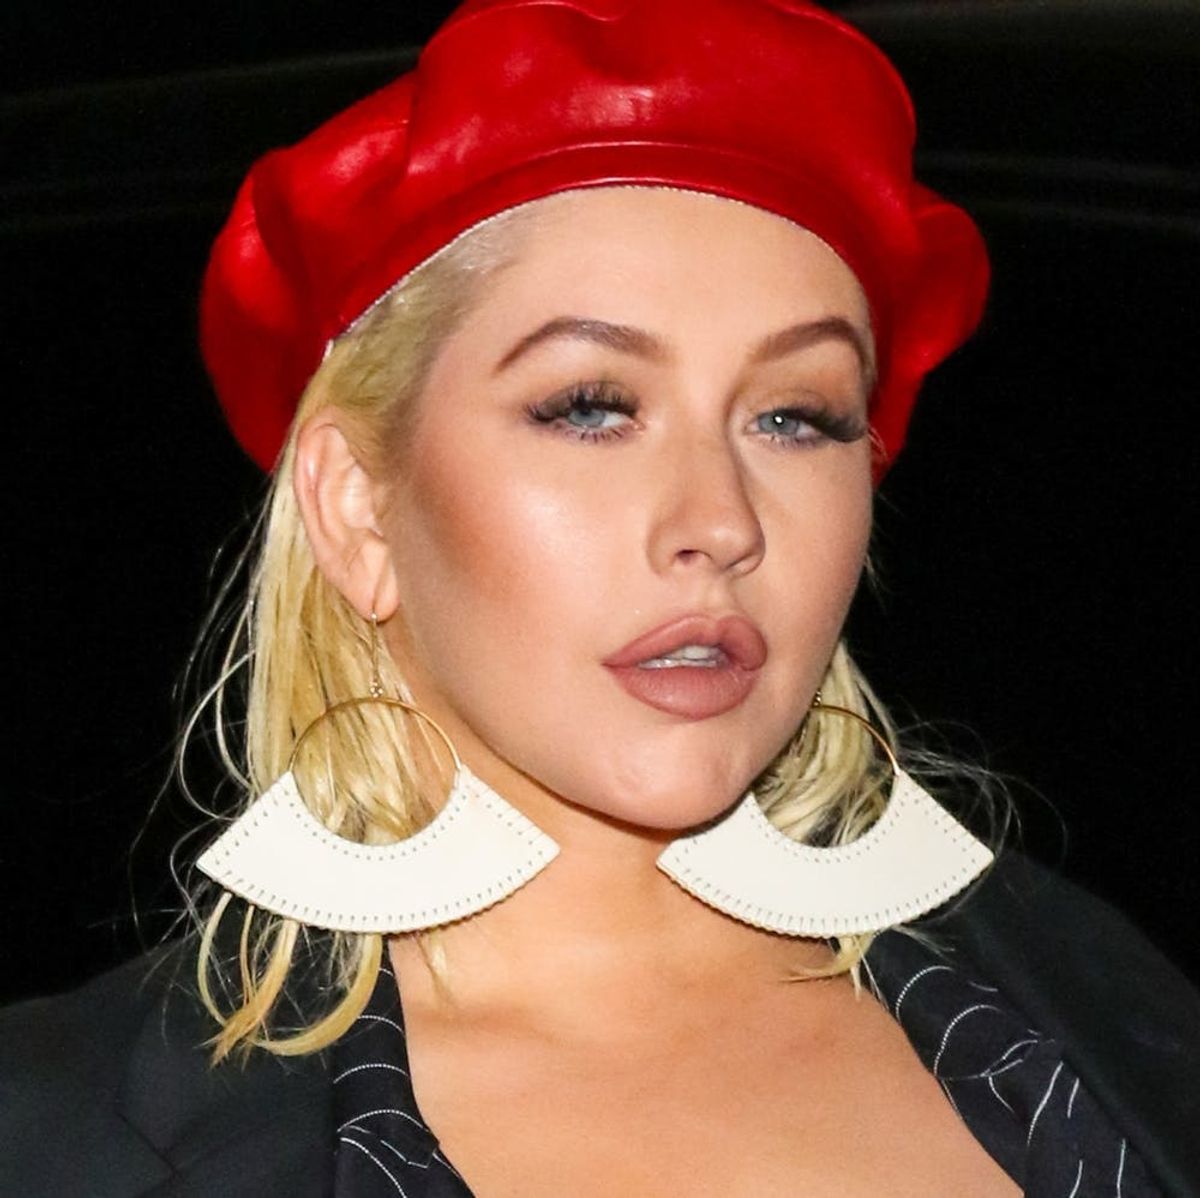 Christina Aguilera Goes Without Makeup to Get a New Piercing